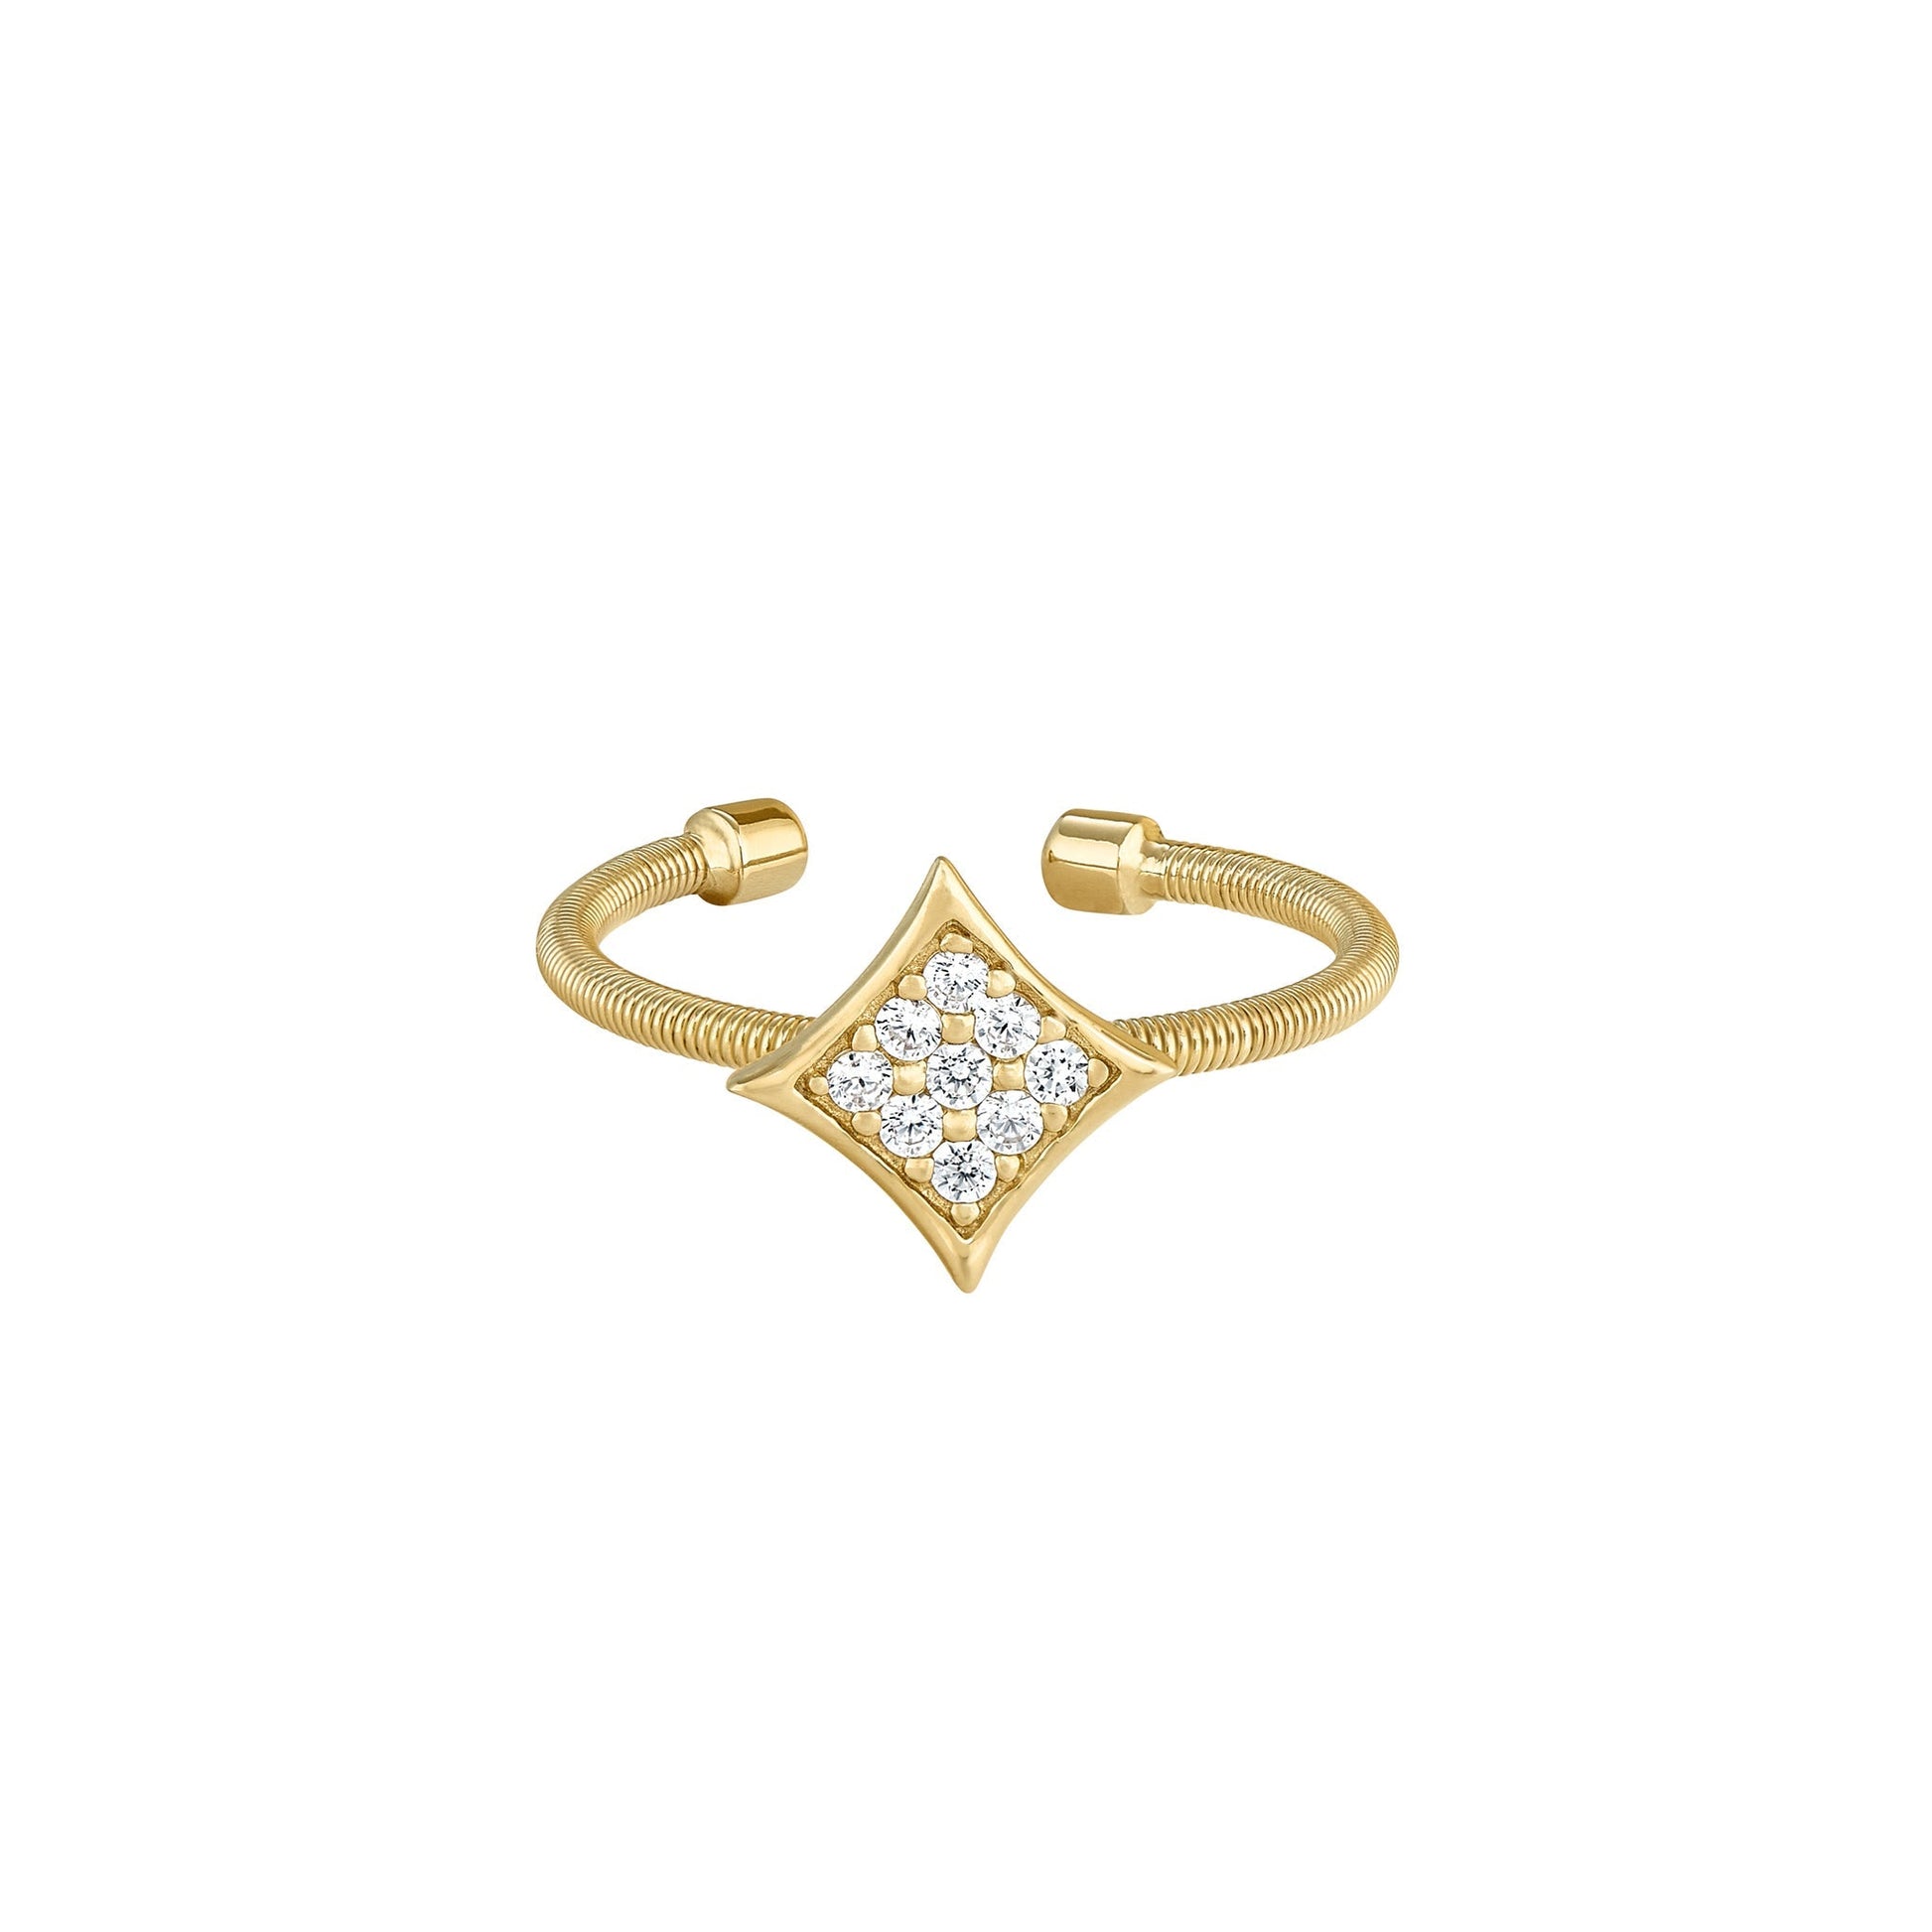 A cable diamond shaped ring with simulated diamonds displayed on a neutral white background.